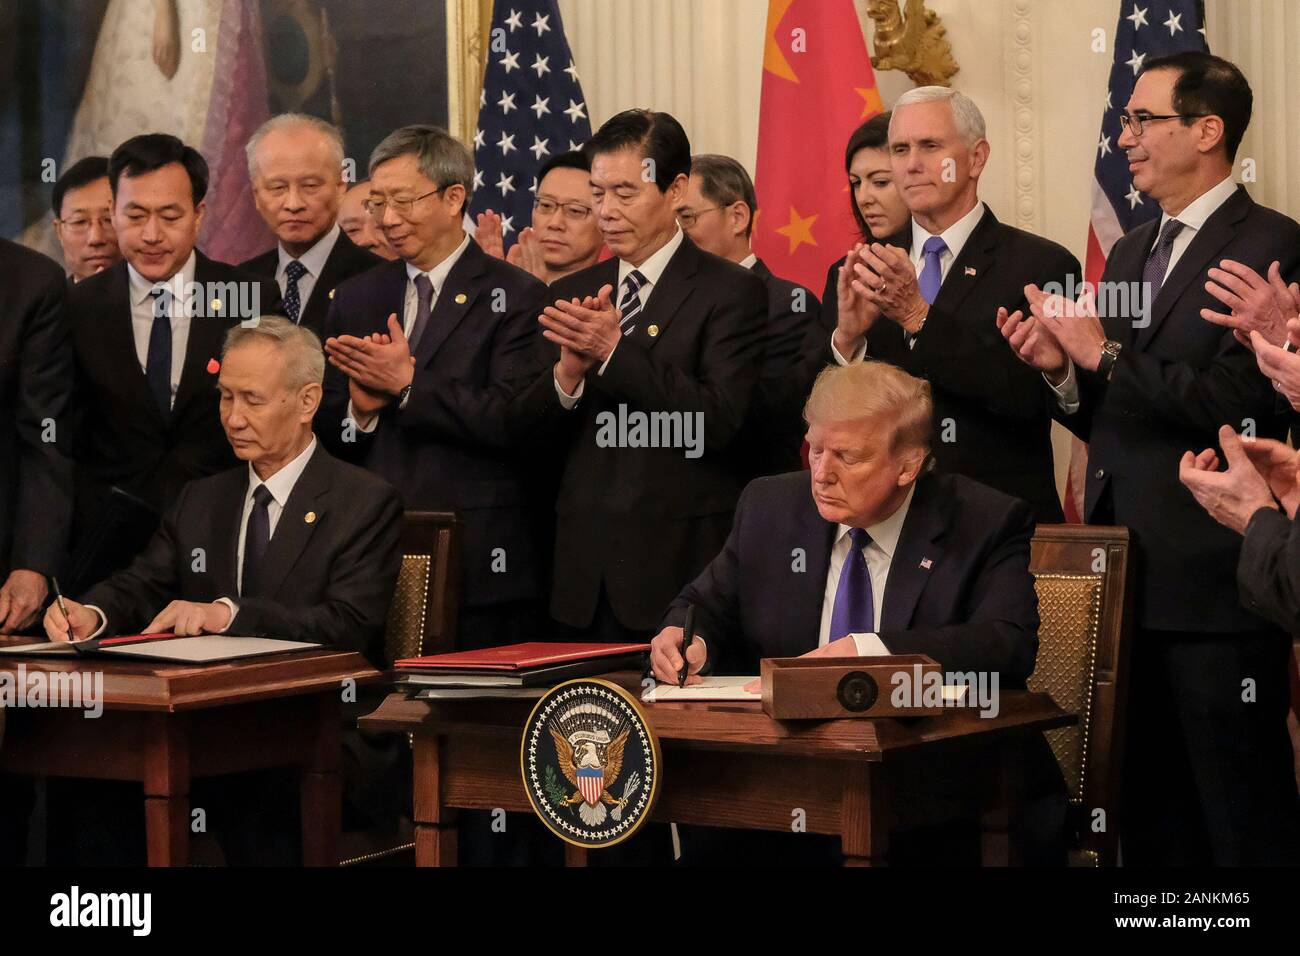 President Donald Trump and Chinese Vice Premier Liu He are applauded after signing the Phase 1 trade deal between the United States and China, during a ceremony in the East Room at the White House on Wednesday, January 15, 2020. The Phase 1 deal will cancel upcoming planned tariffs on Chinese-made products and reduces others while Chine has agreed to increase purchases of U.S. farm products and other goods. Credit: Alex Wroblewski/Pool via CNP /MediaPunch Stock Photo